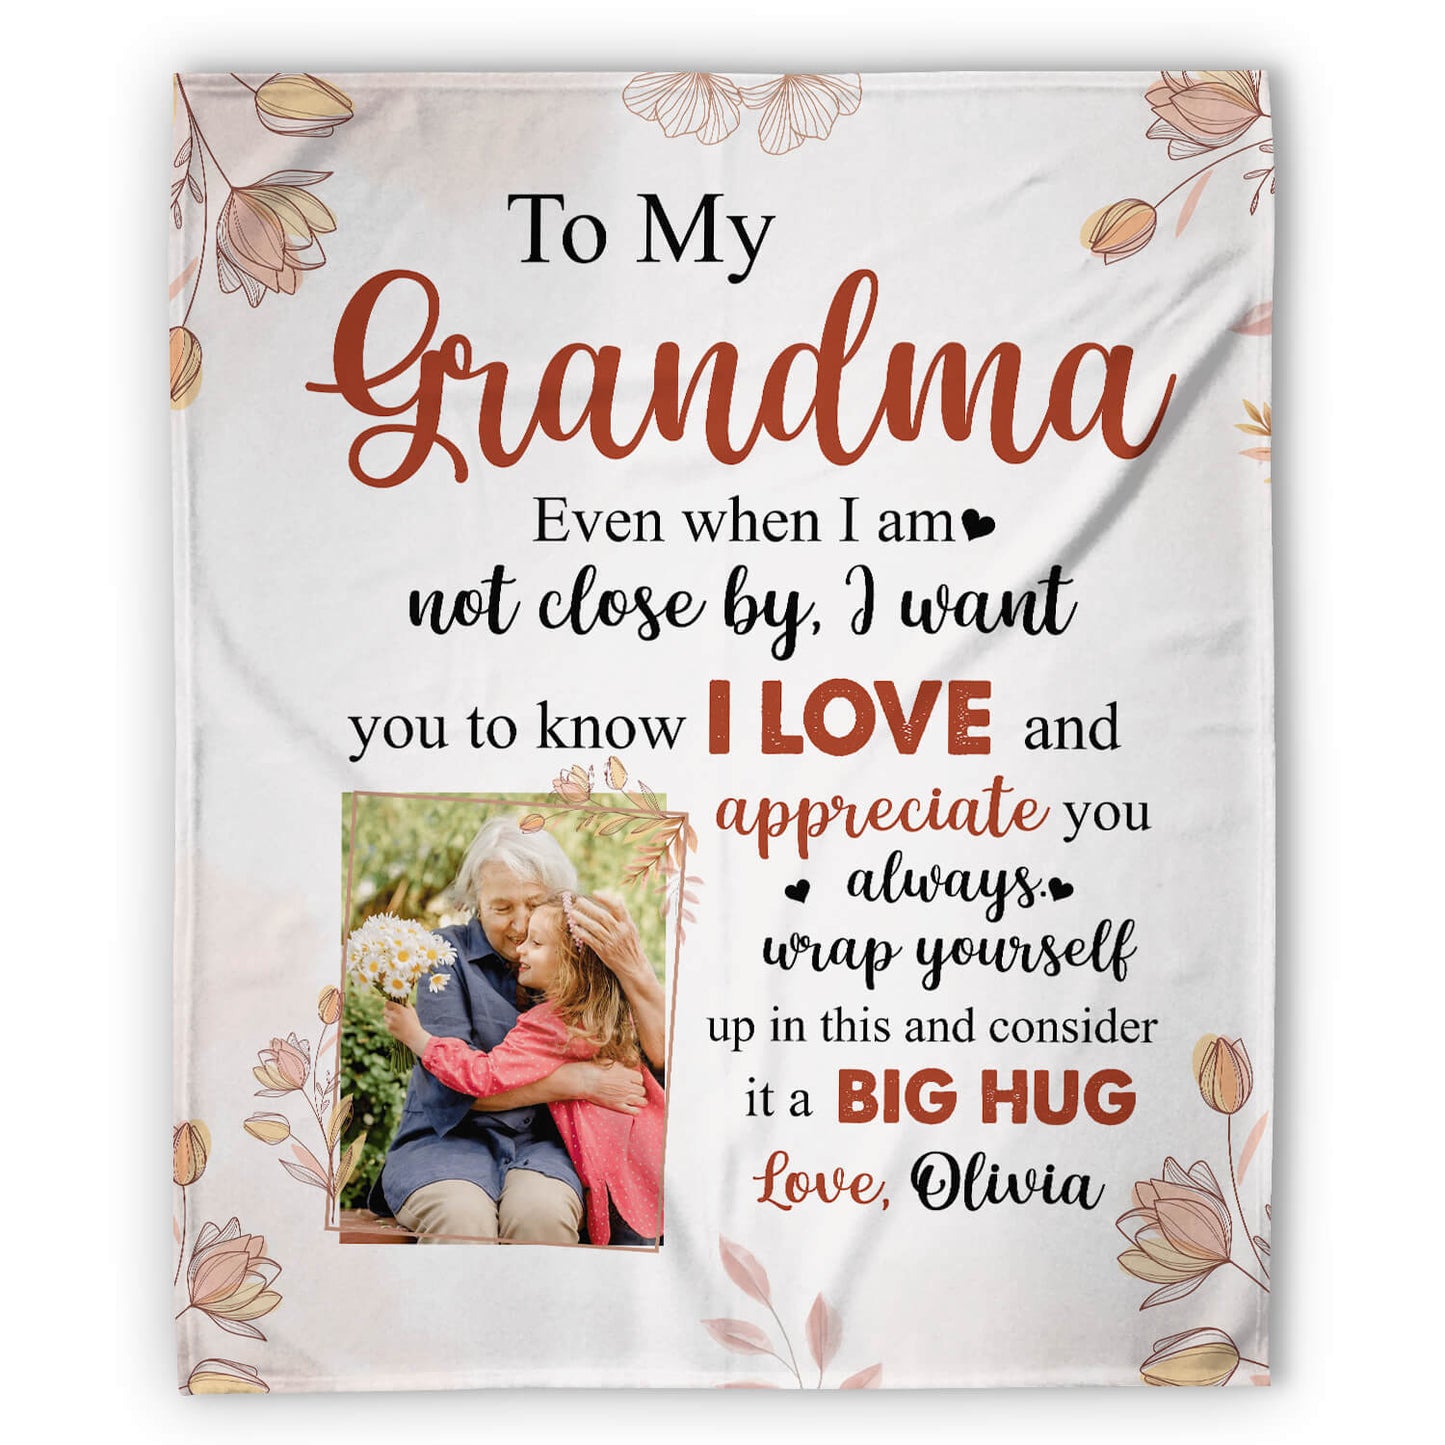 To my grandma - Personalized Mother's Day or Birthday gift for Grandma - Custom Blanket - MyMindfulGifts